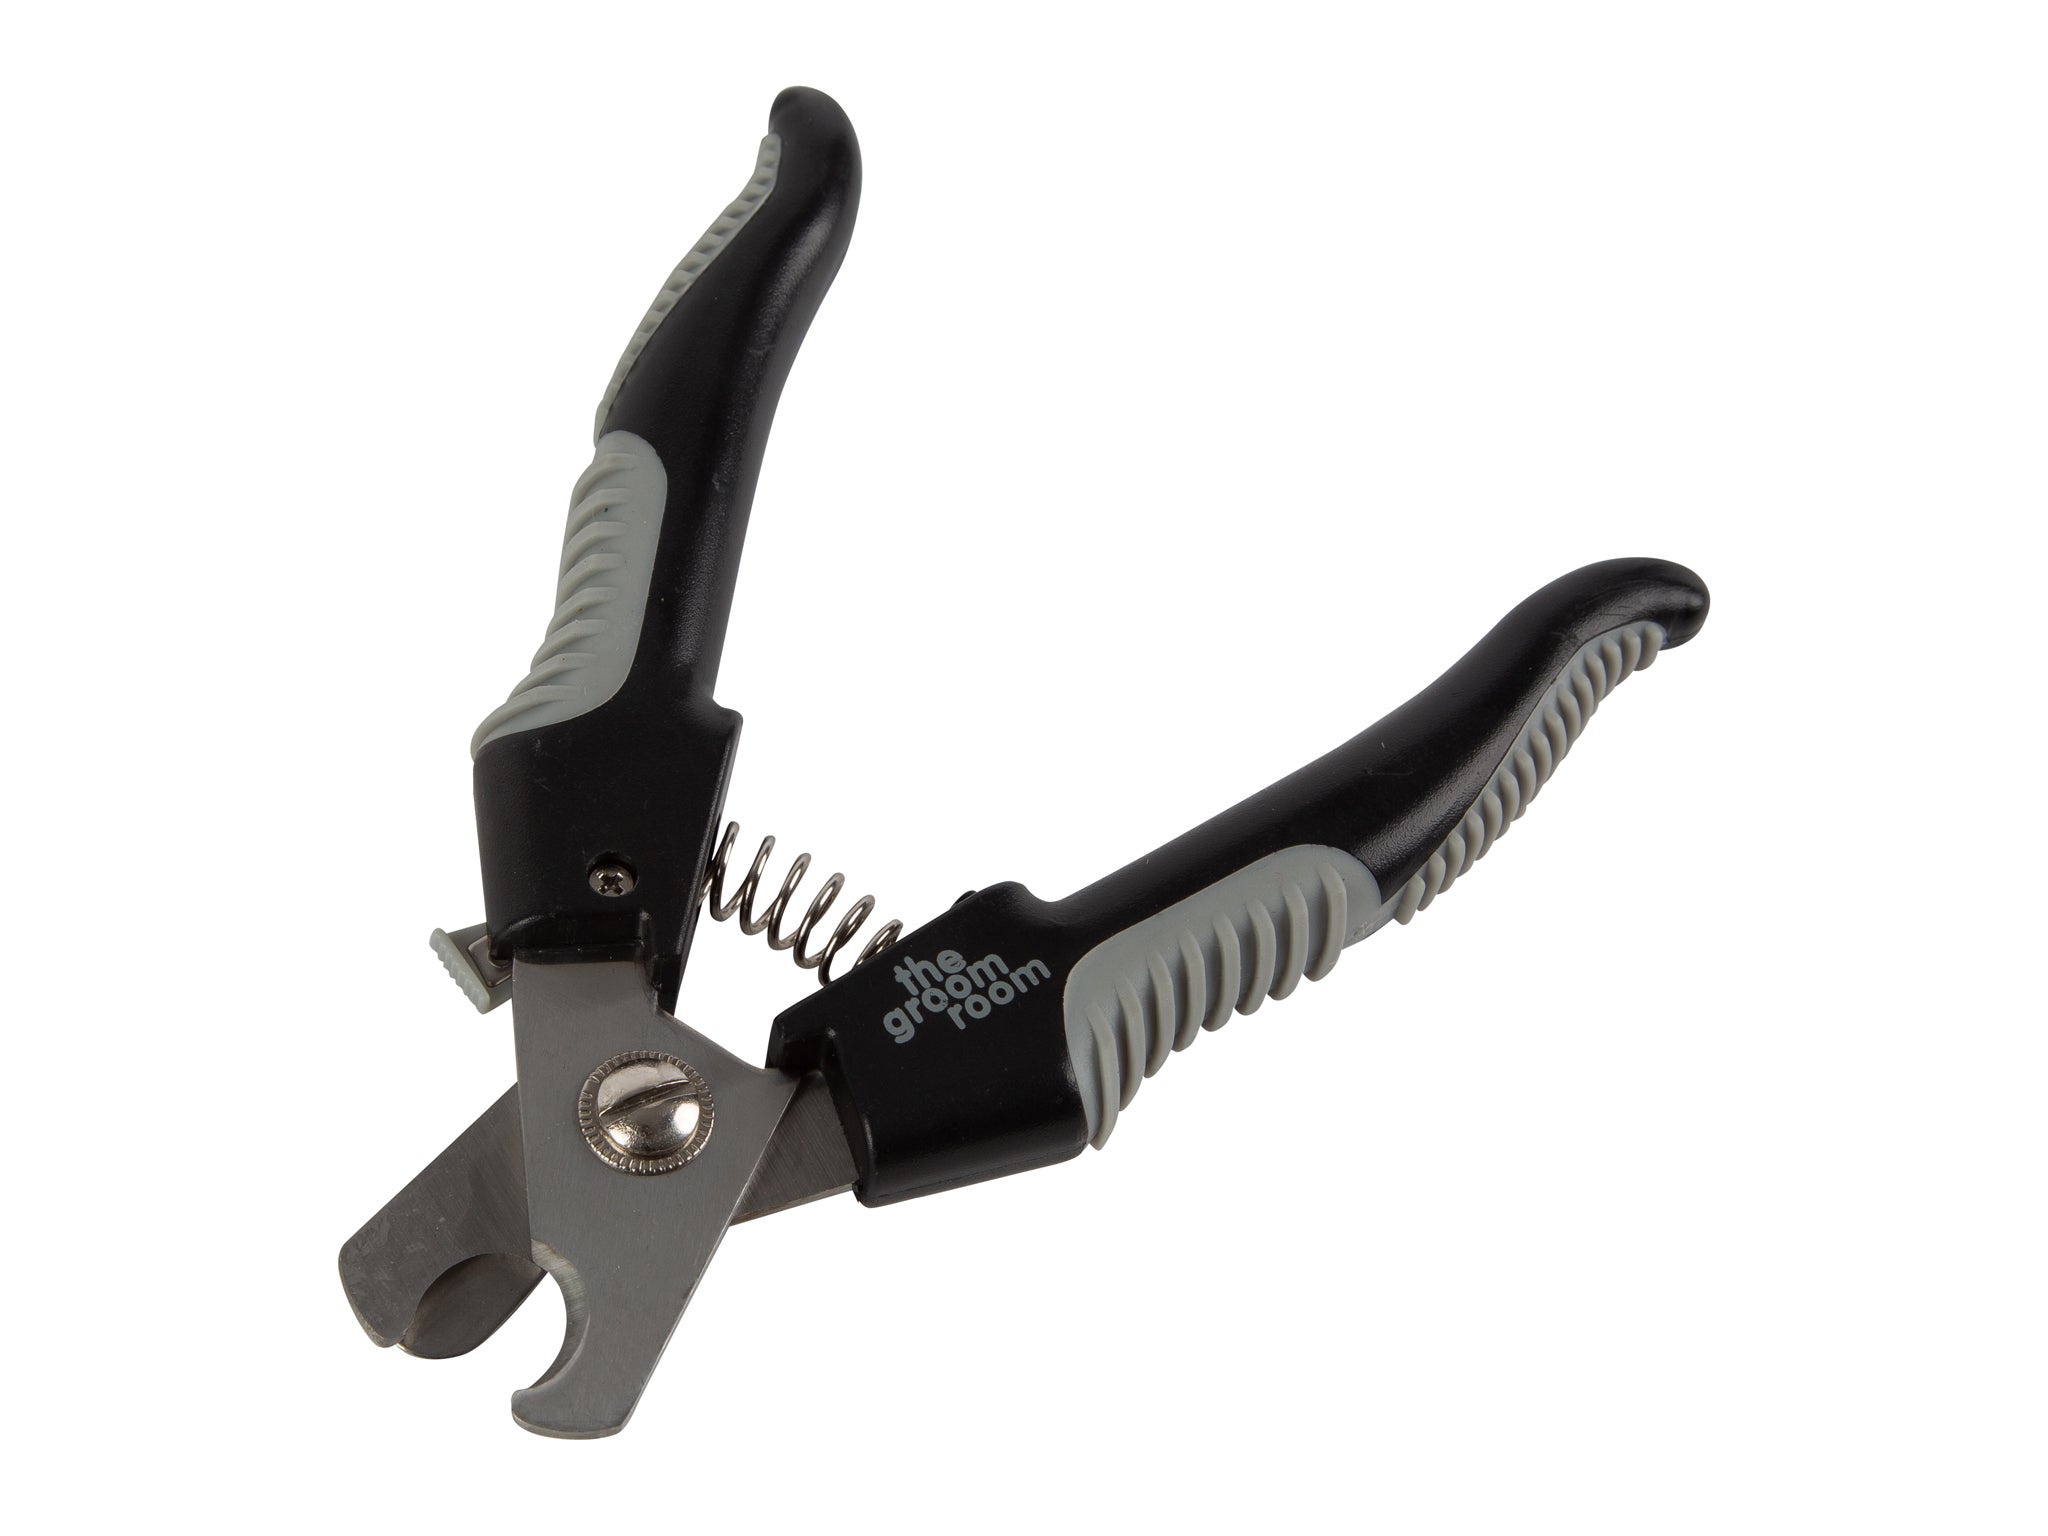 Groom Room Dog Claw Clippers Large.jpg